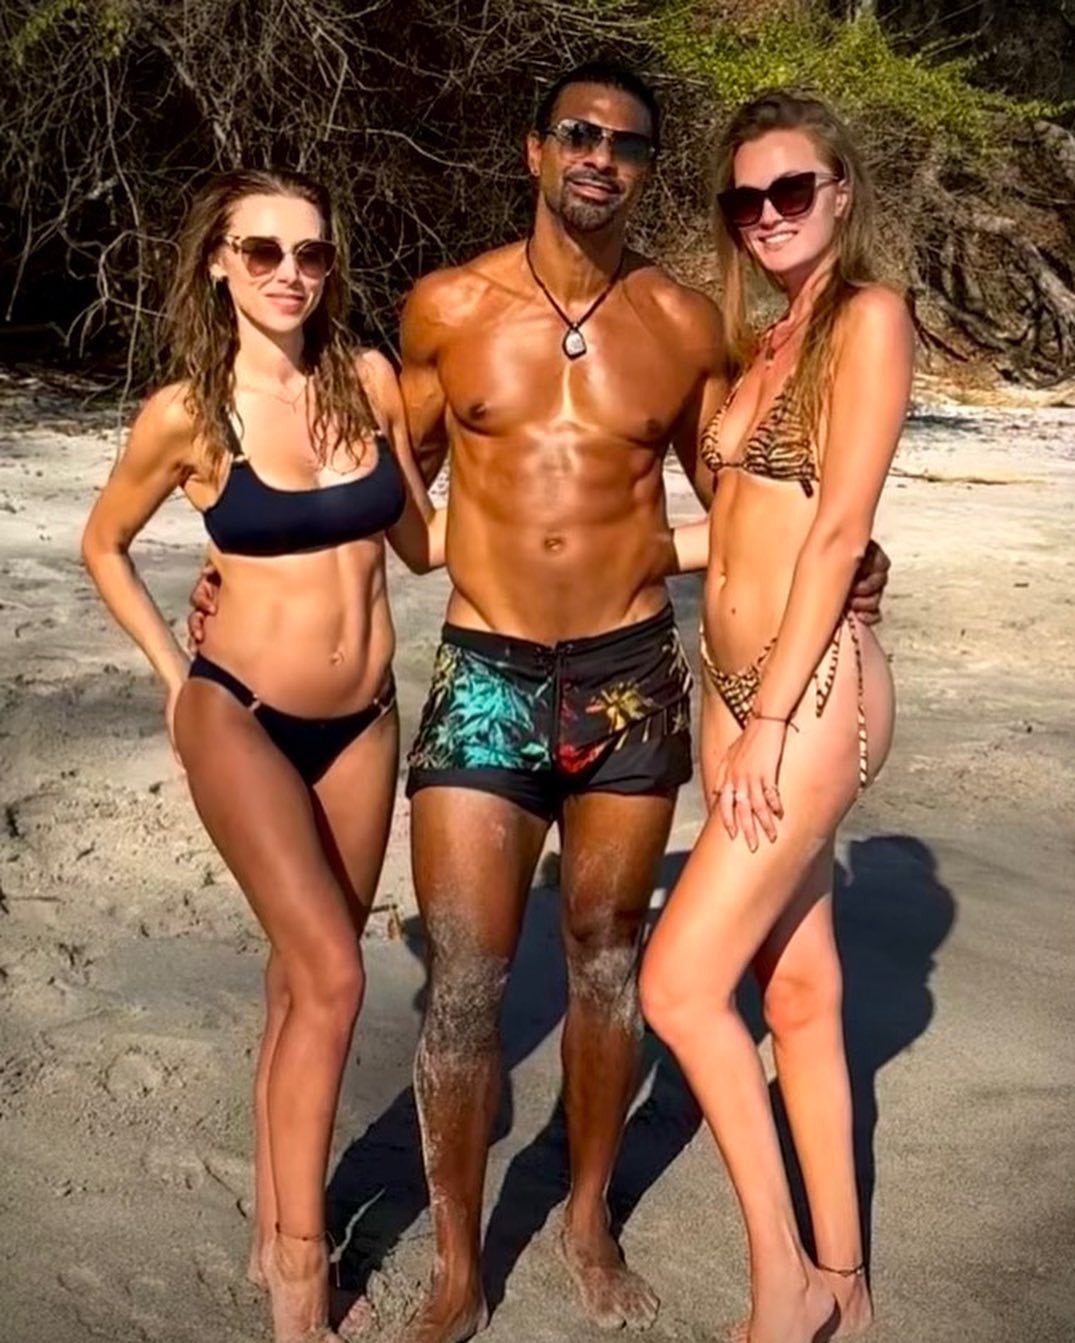 Una Healy has called off her 'throuple' with boxer David Haye and model Sian Osborne.